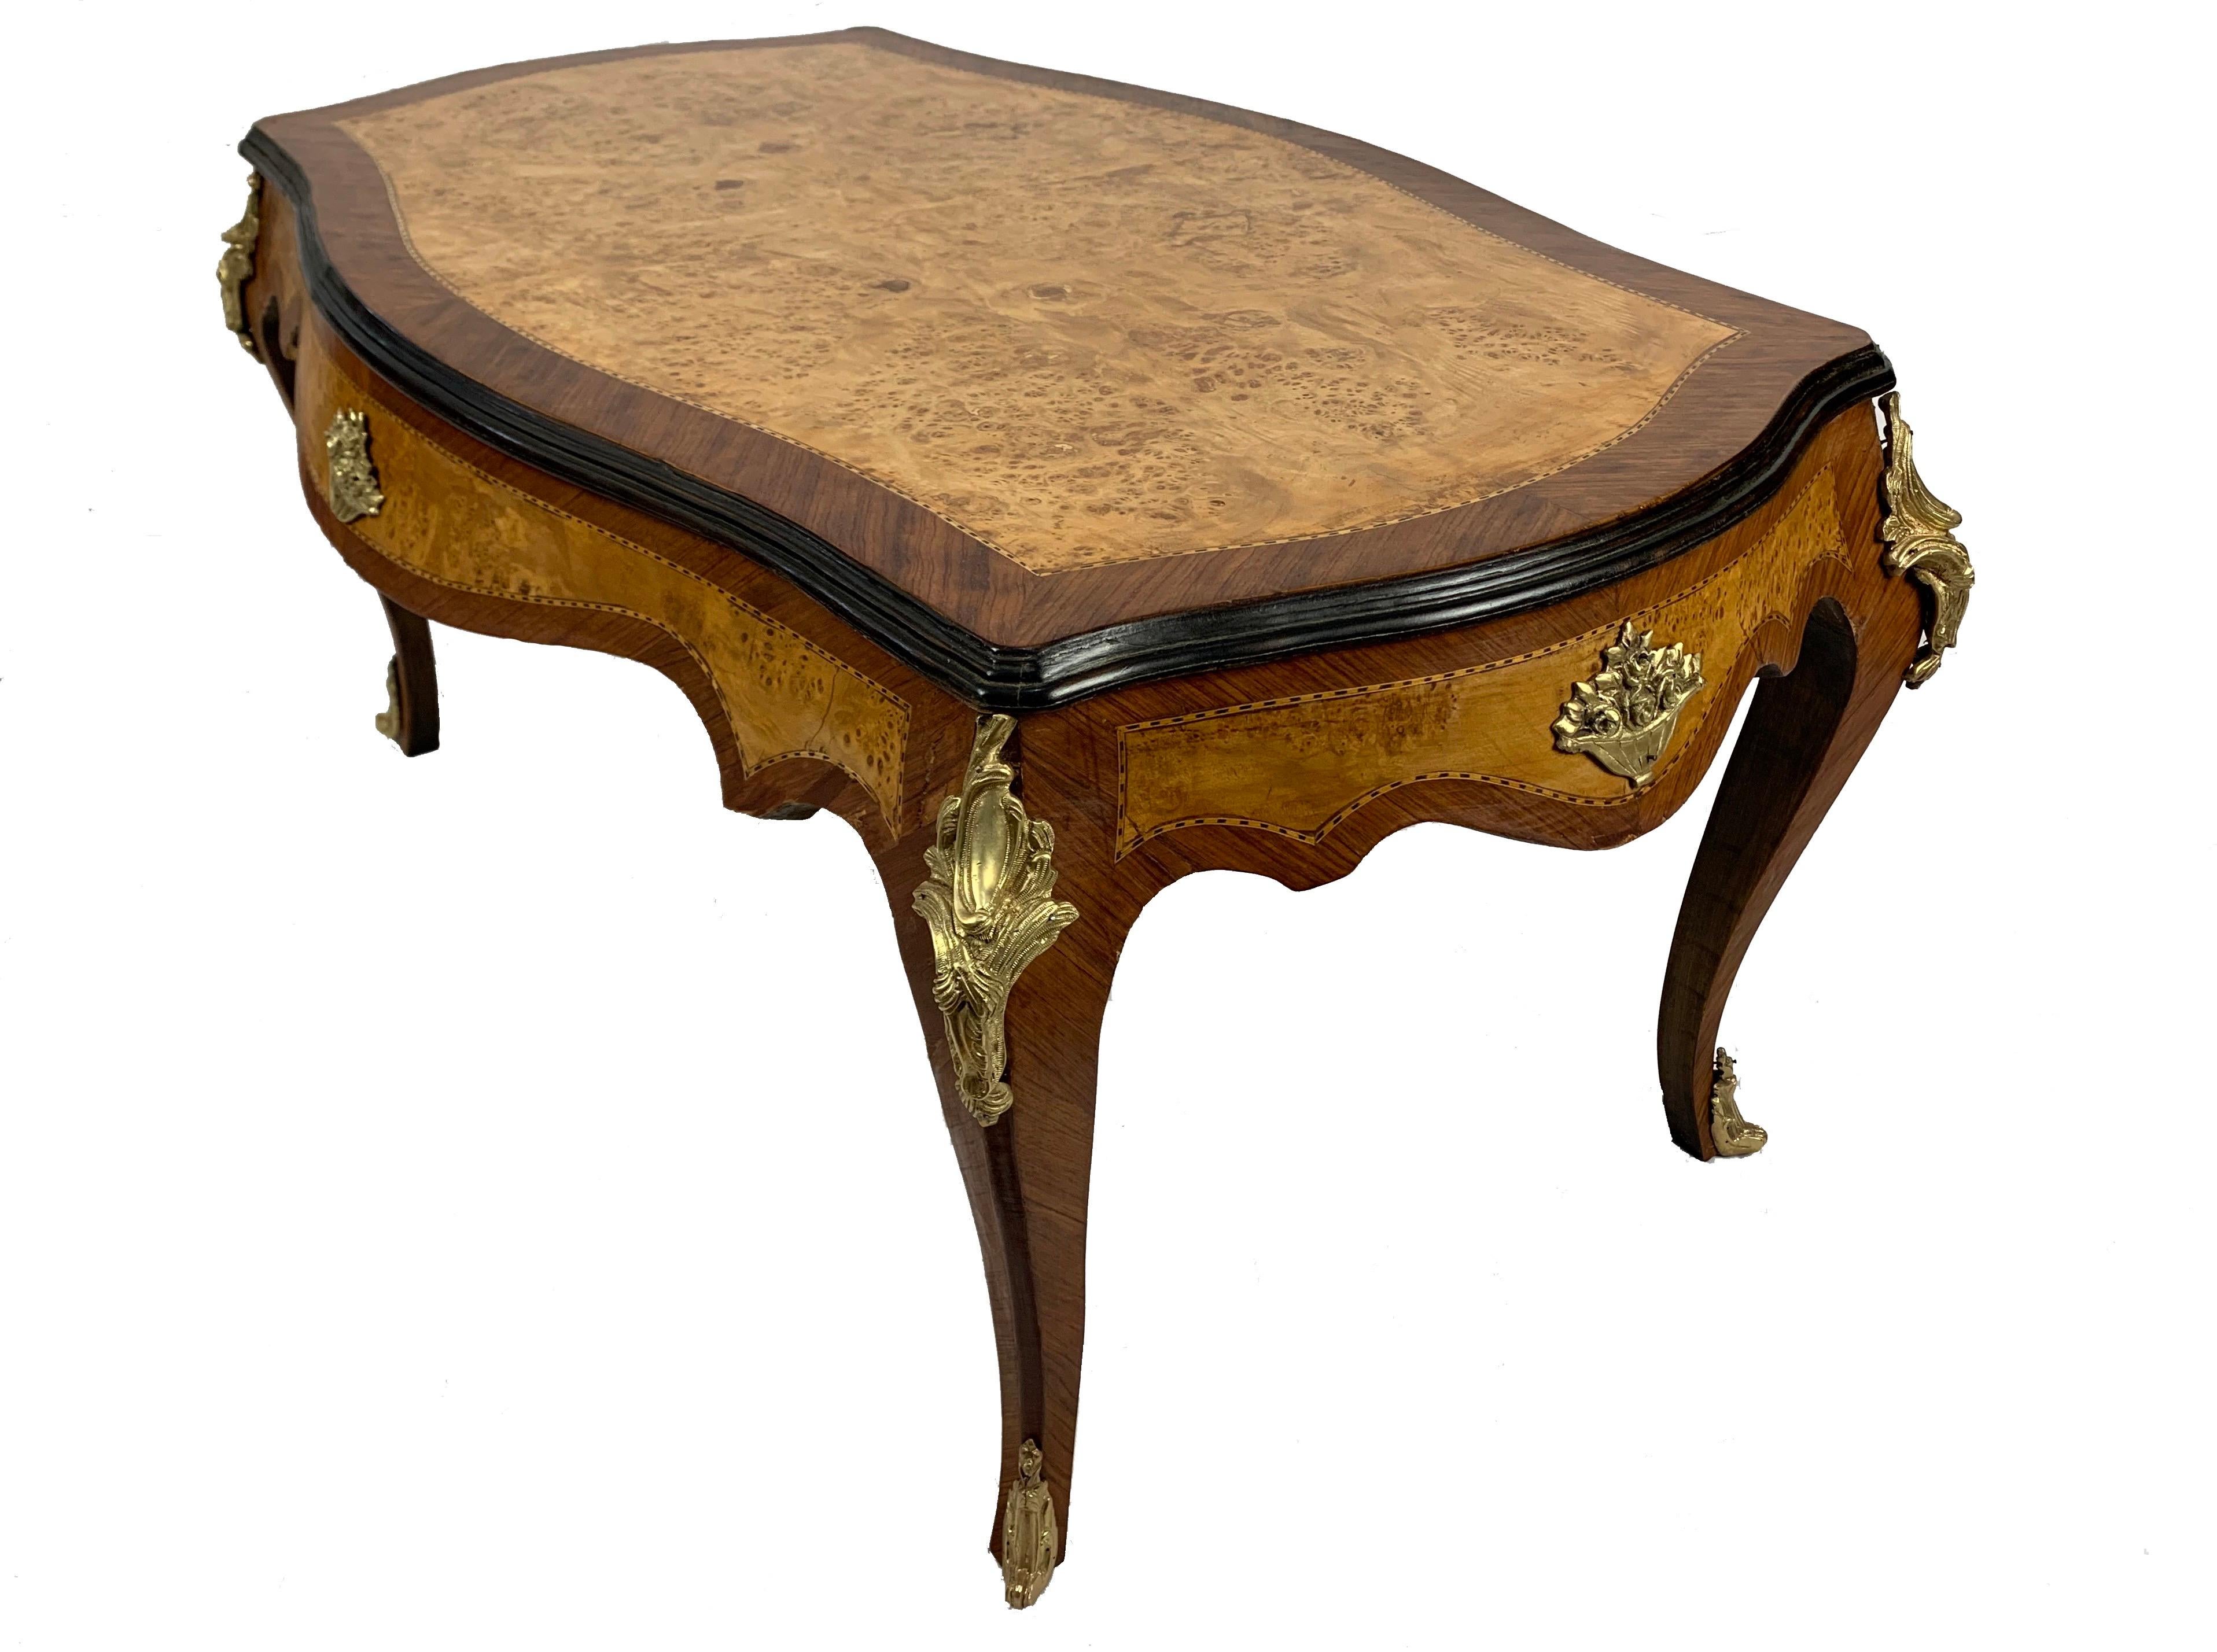 20th Century French Inlaid Burled Walnut and Gilt Bronze Mounted Coffee Table